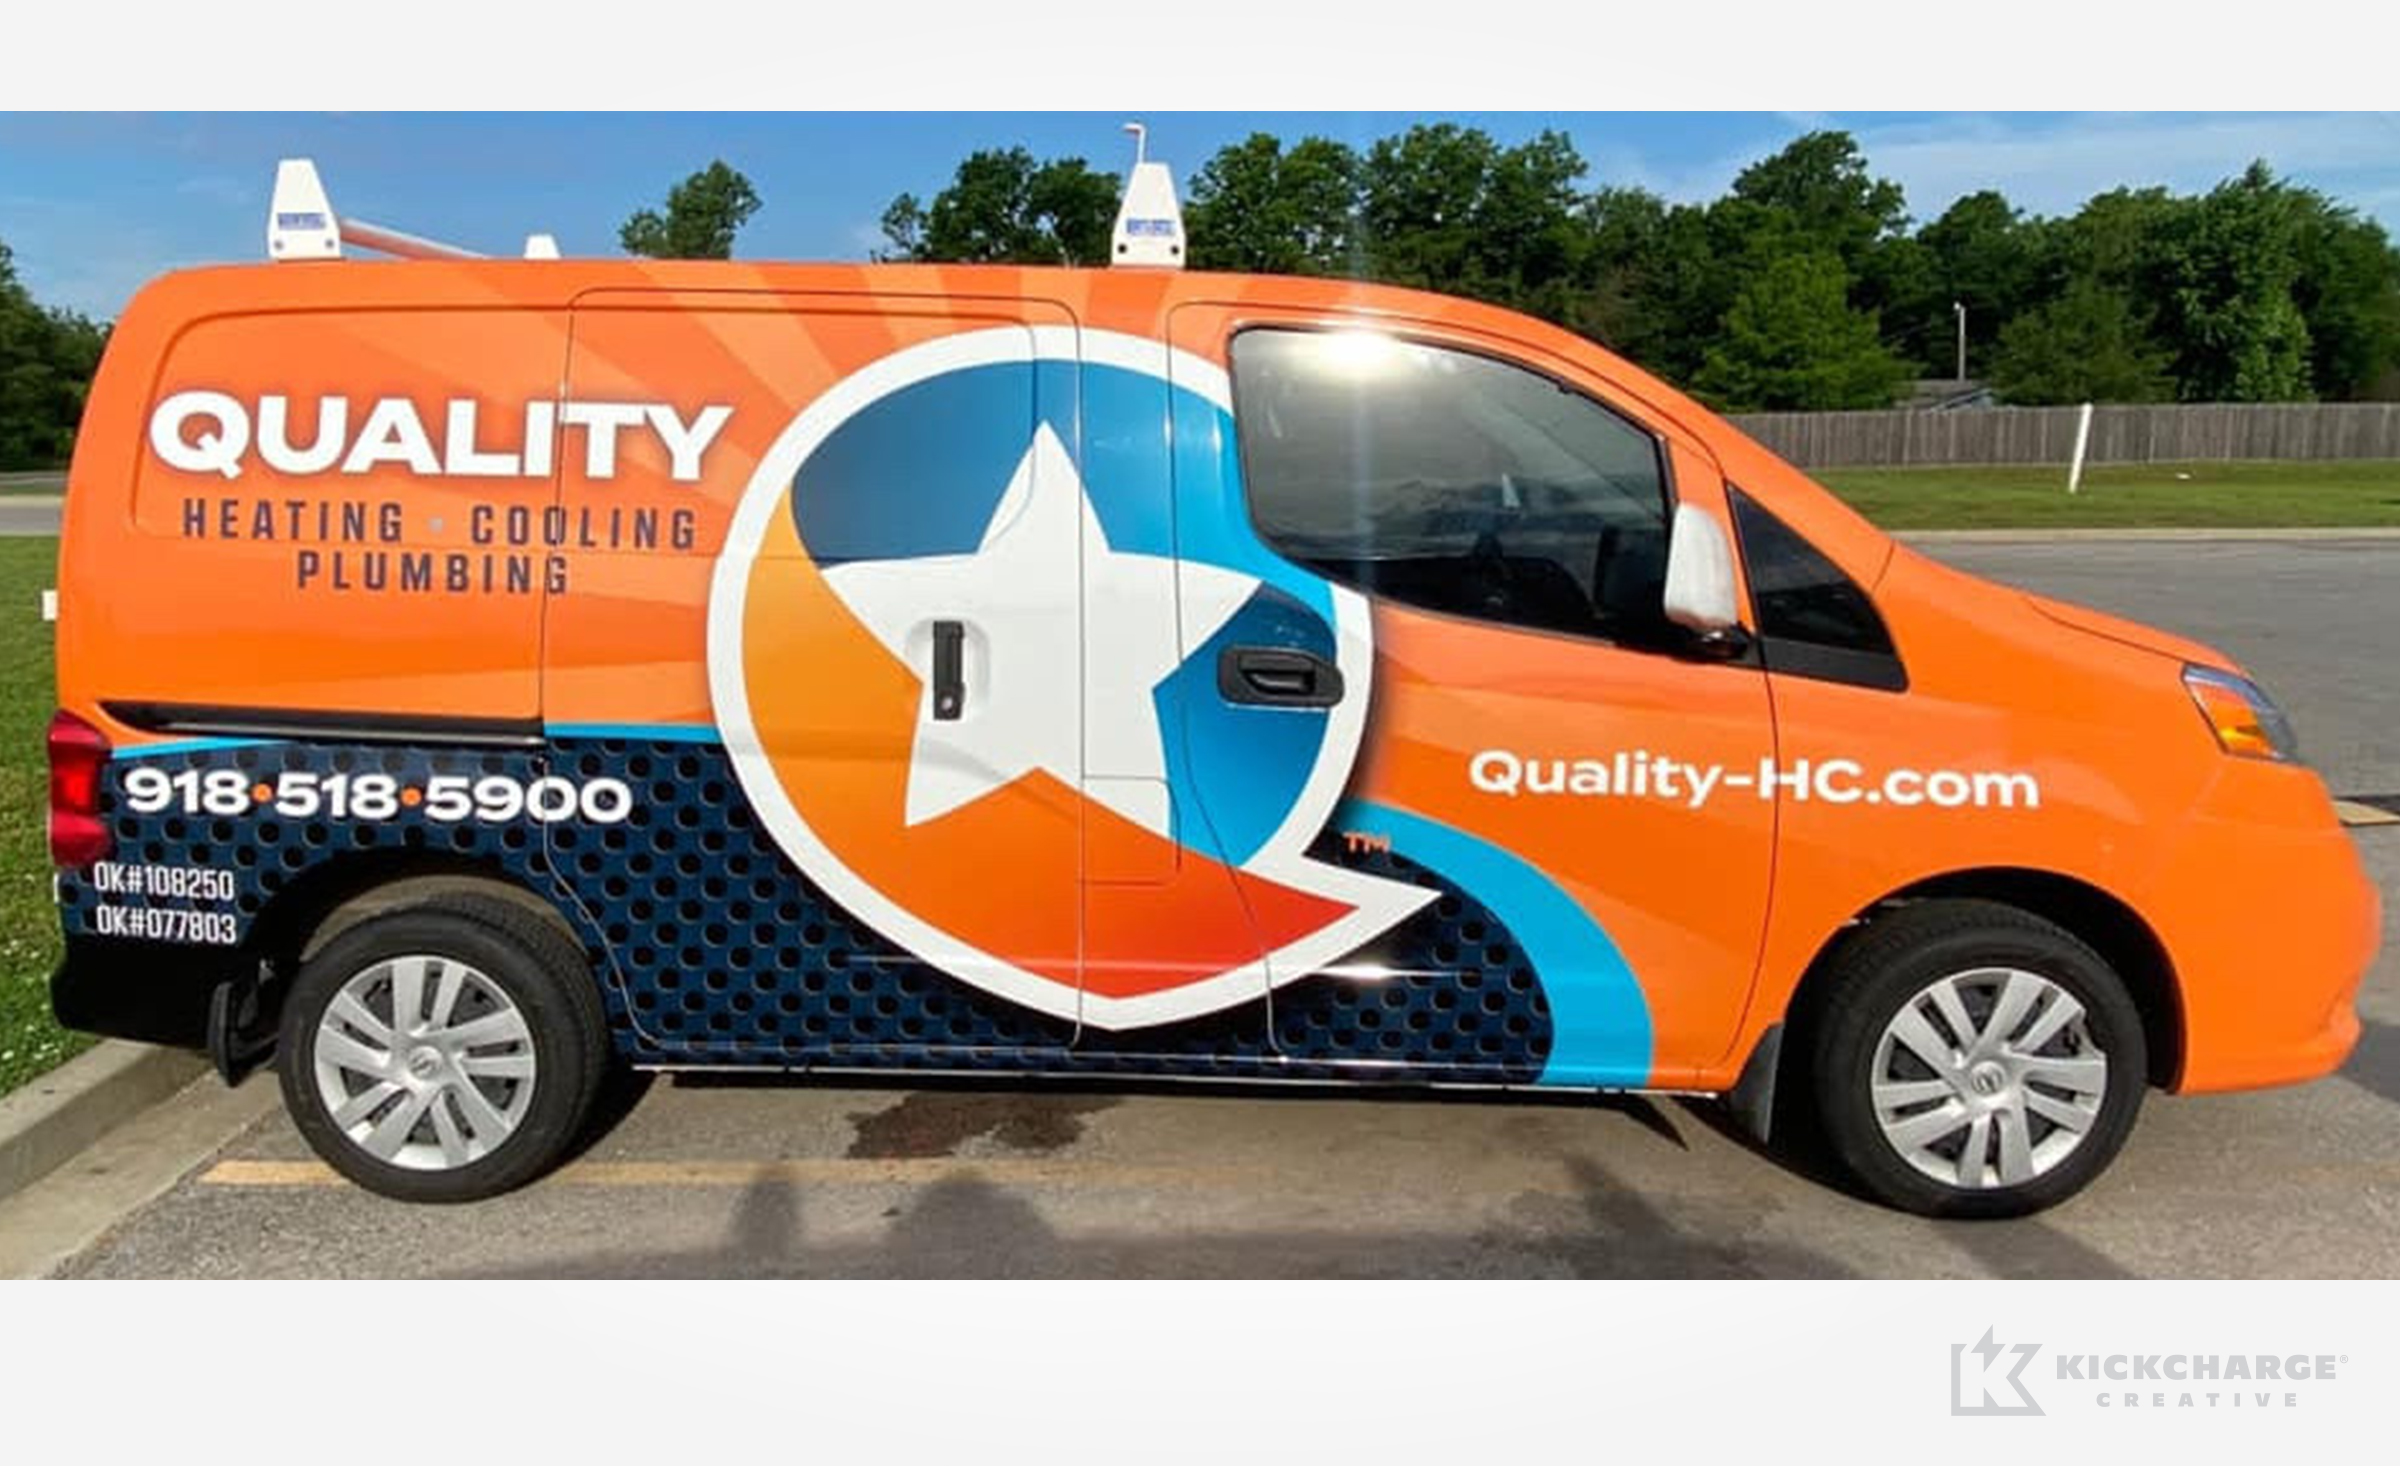 hvac truck wrap for quality heating, cooling & plumbing